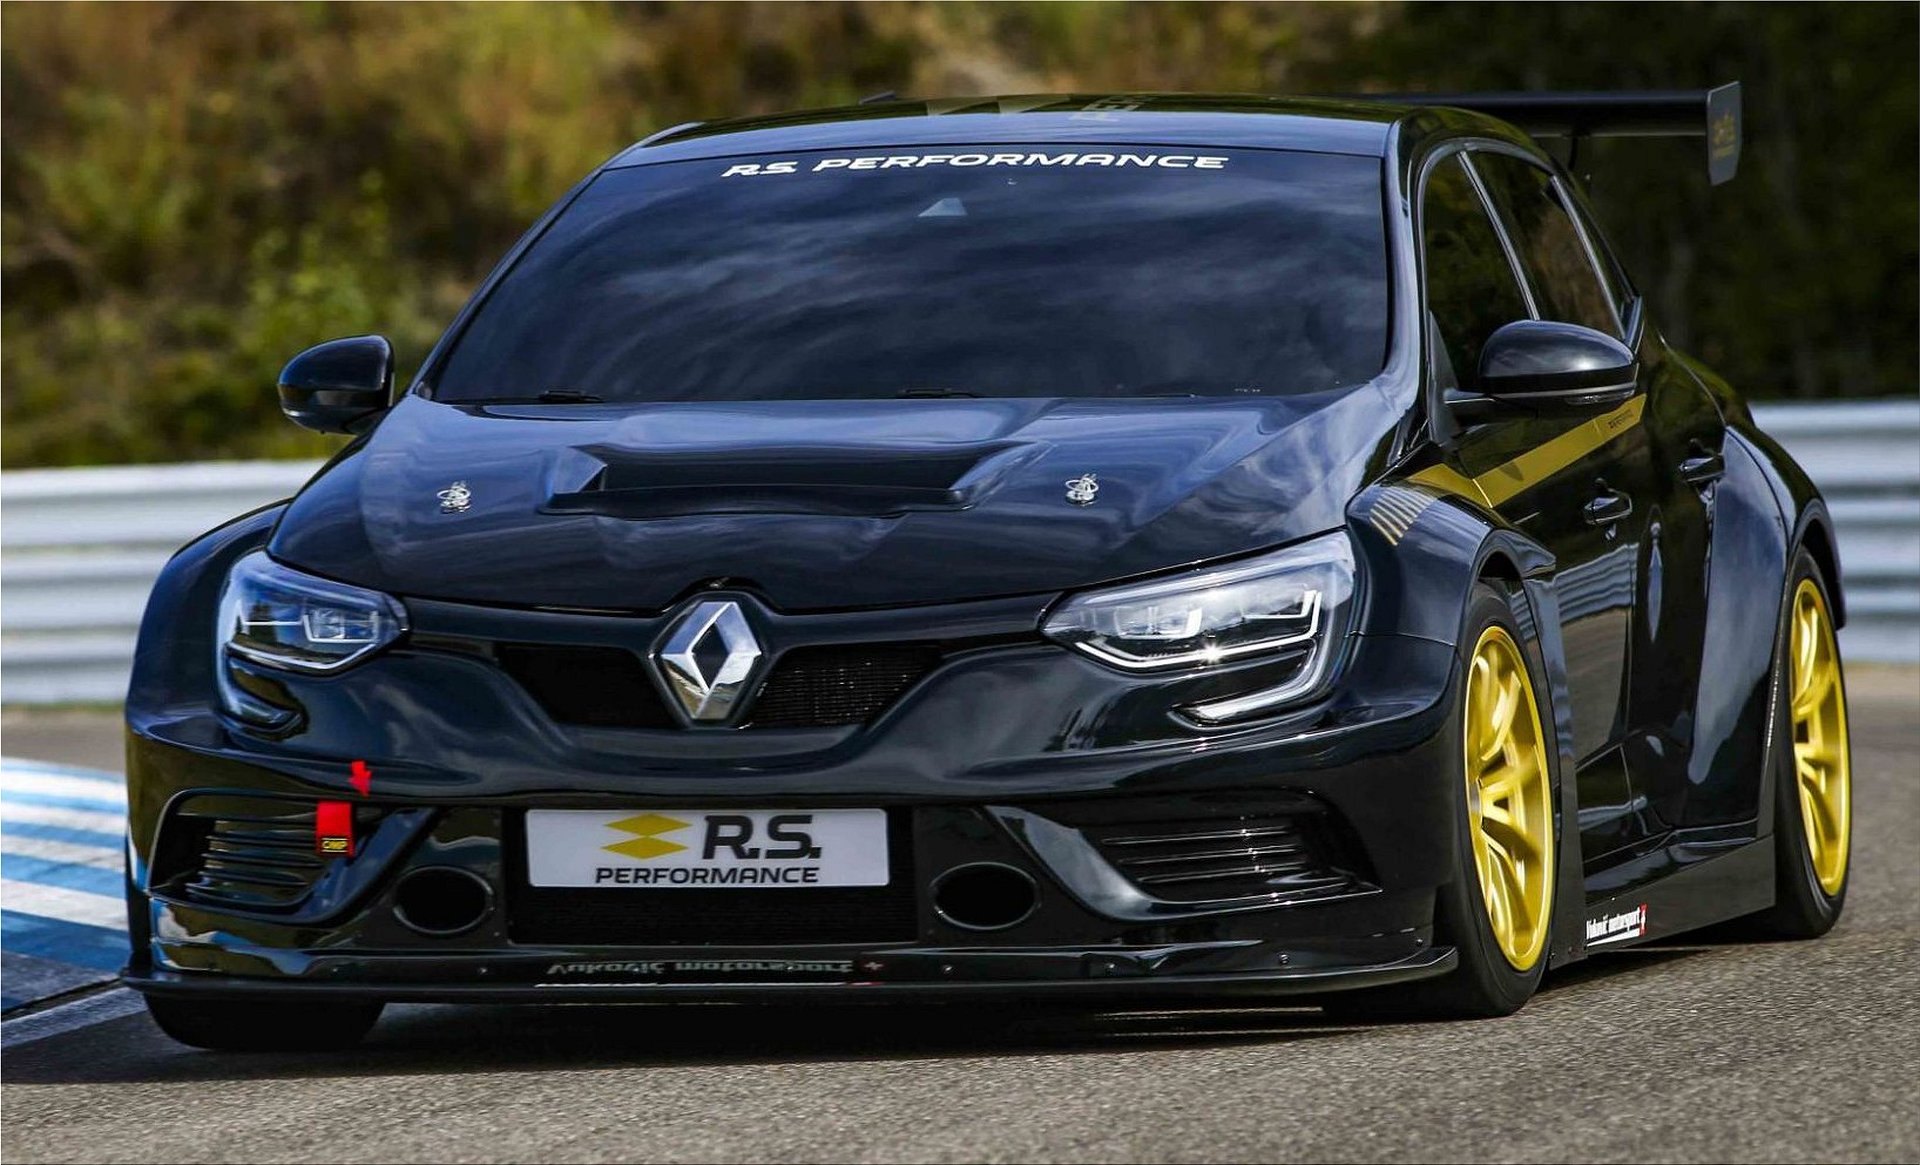 The new French beast Renault Megane RS TC4Renault